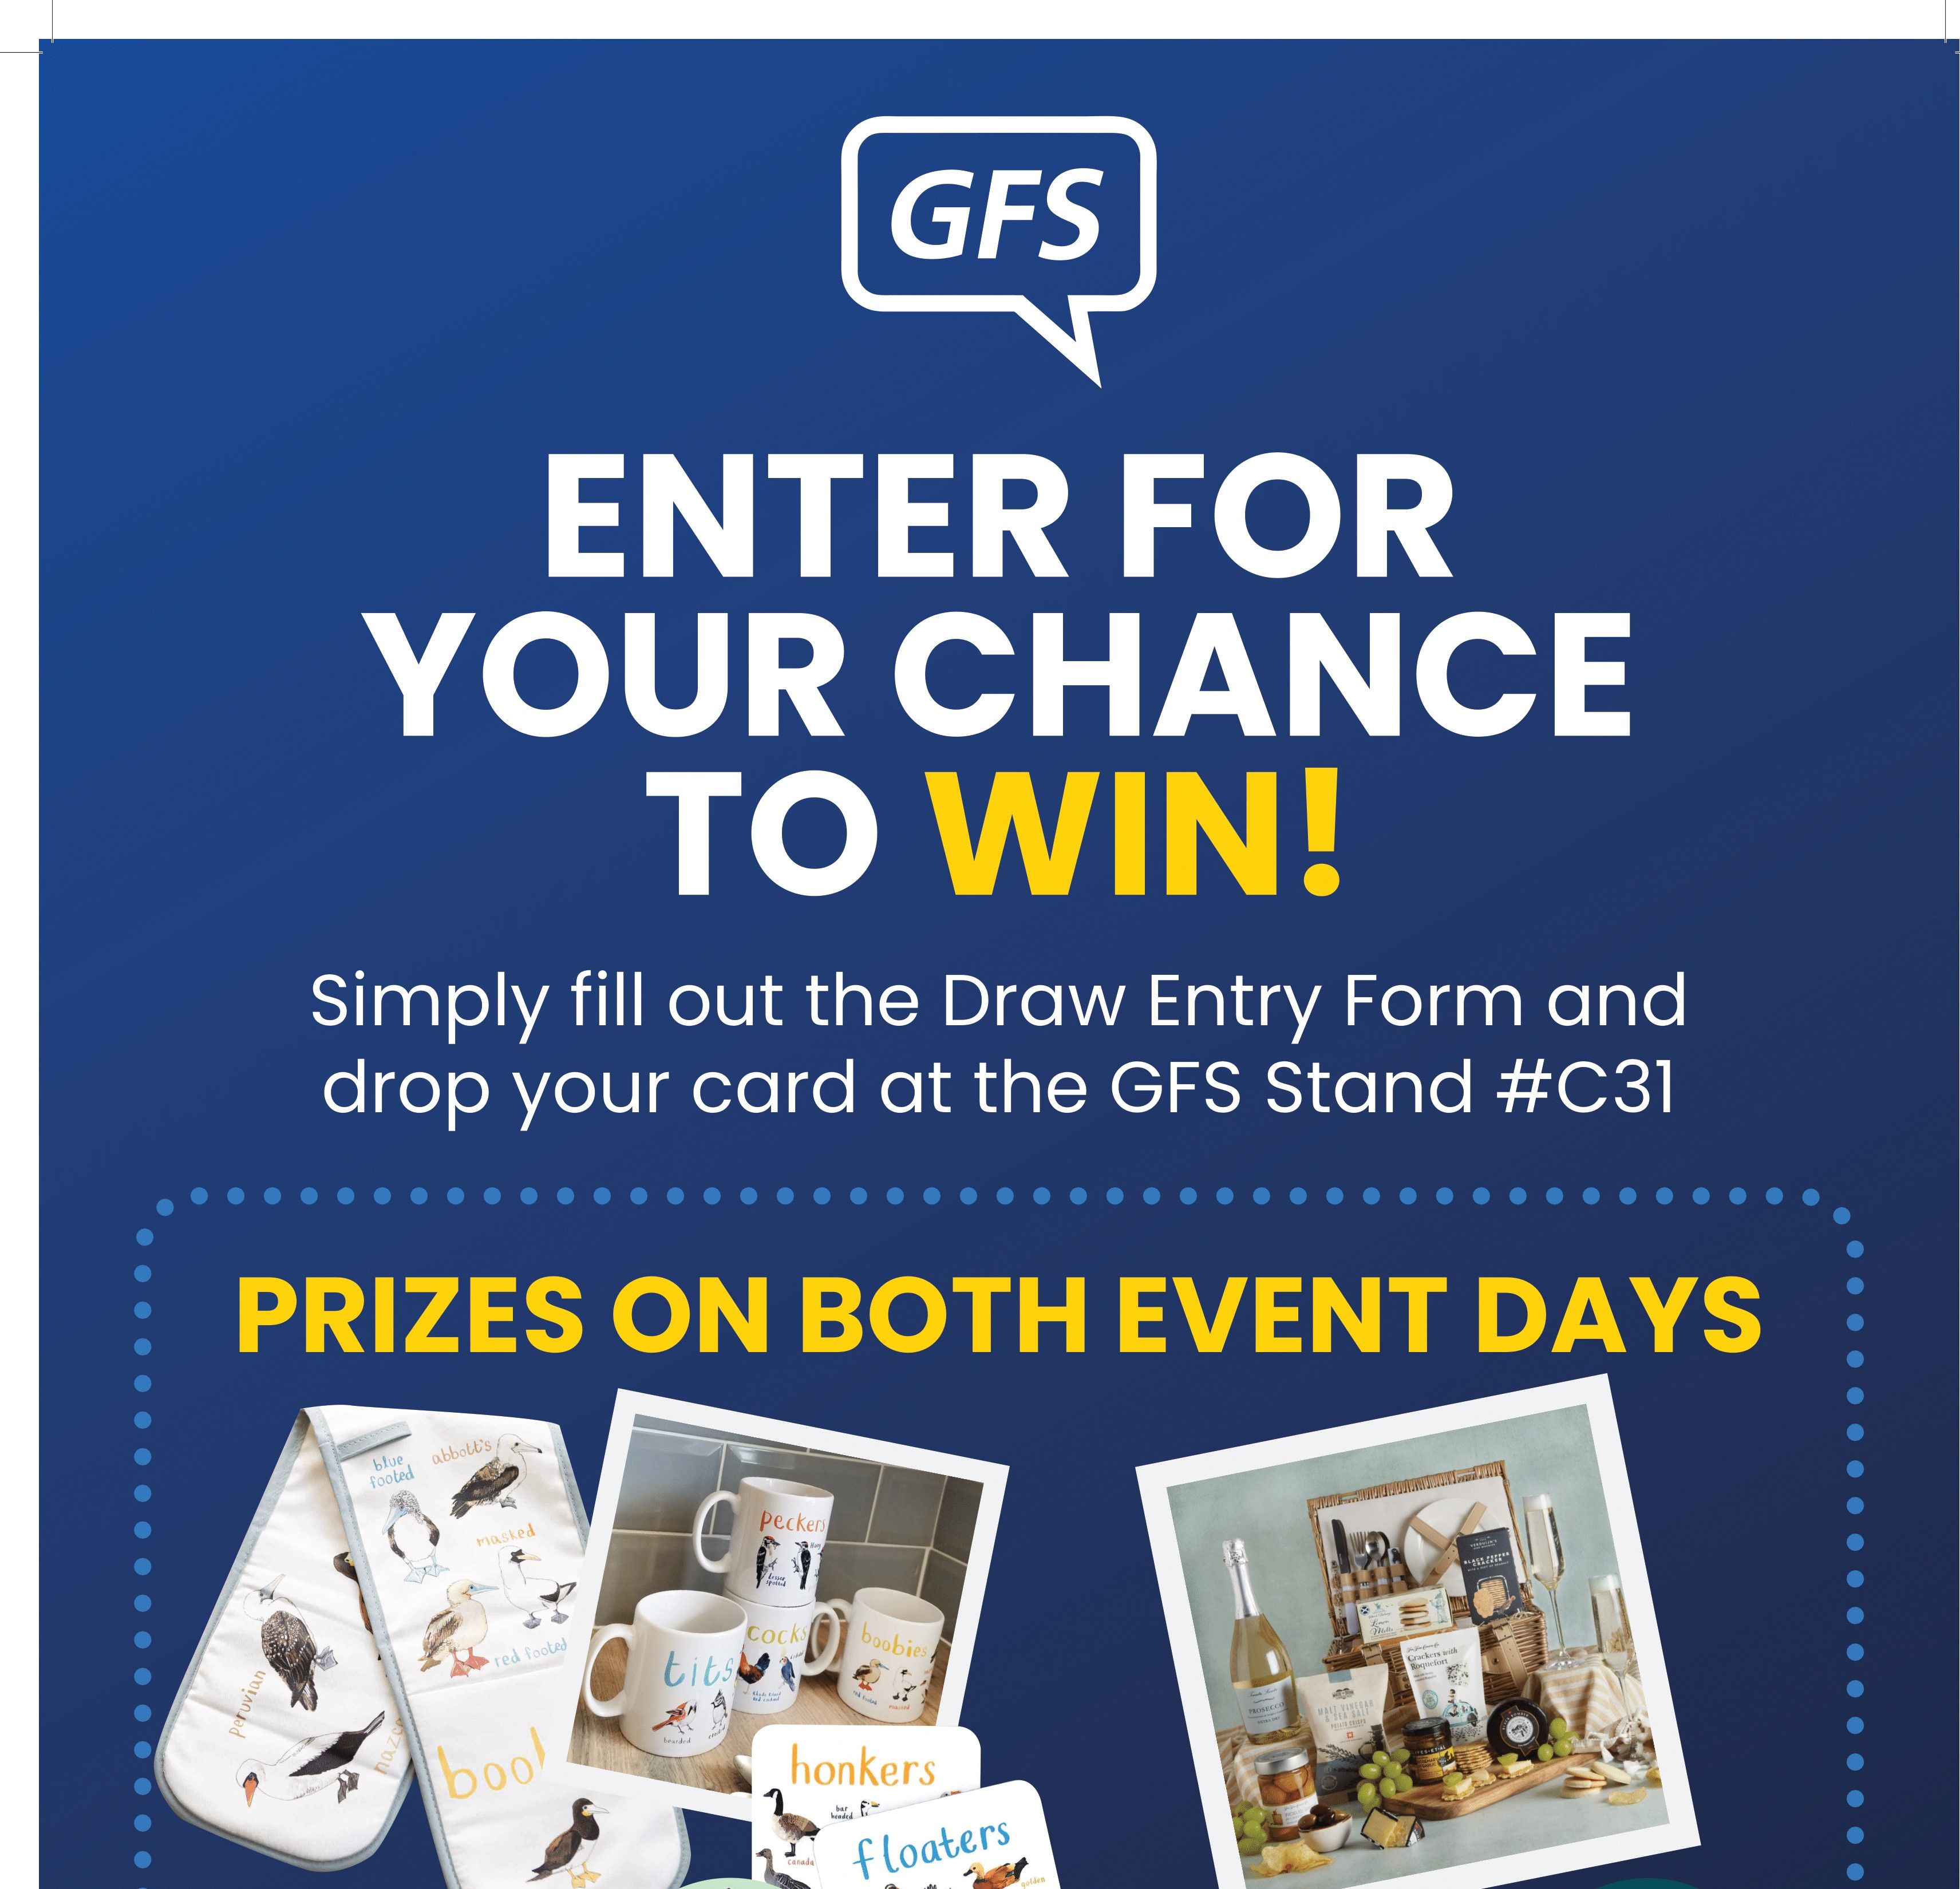 Visit GFS at stand C31 for a chance to a win a selection of amazing prizes!